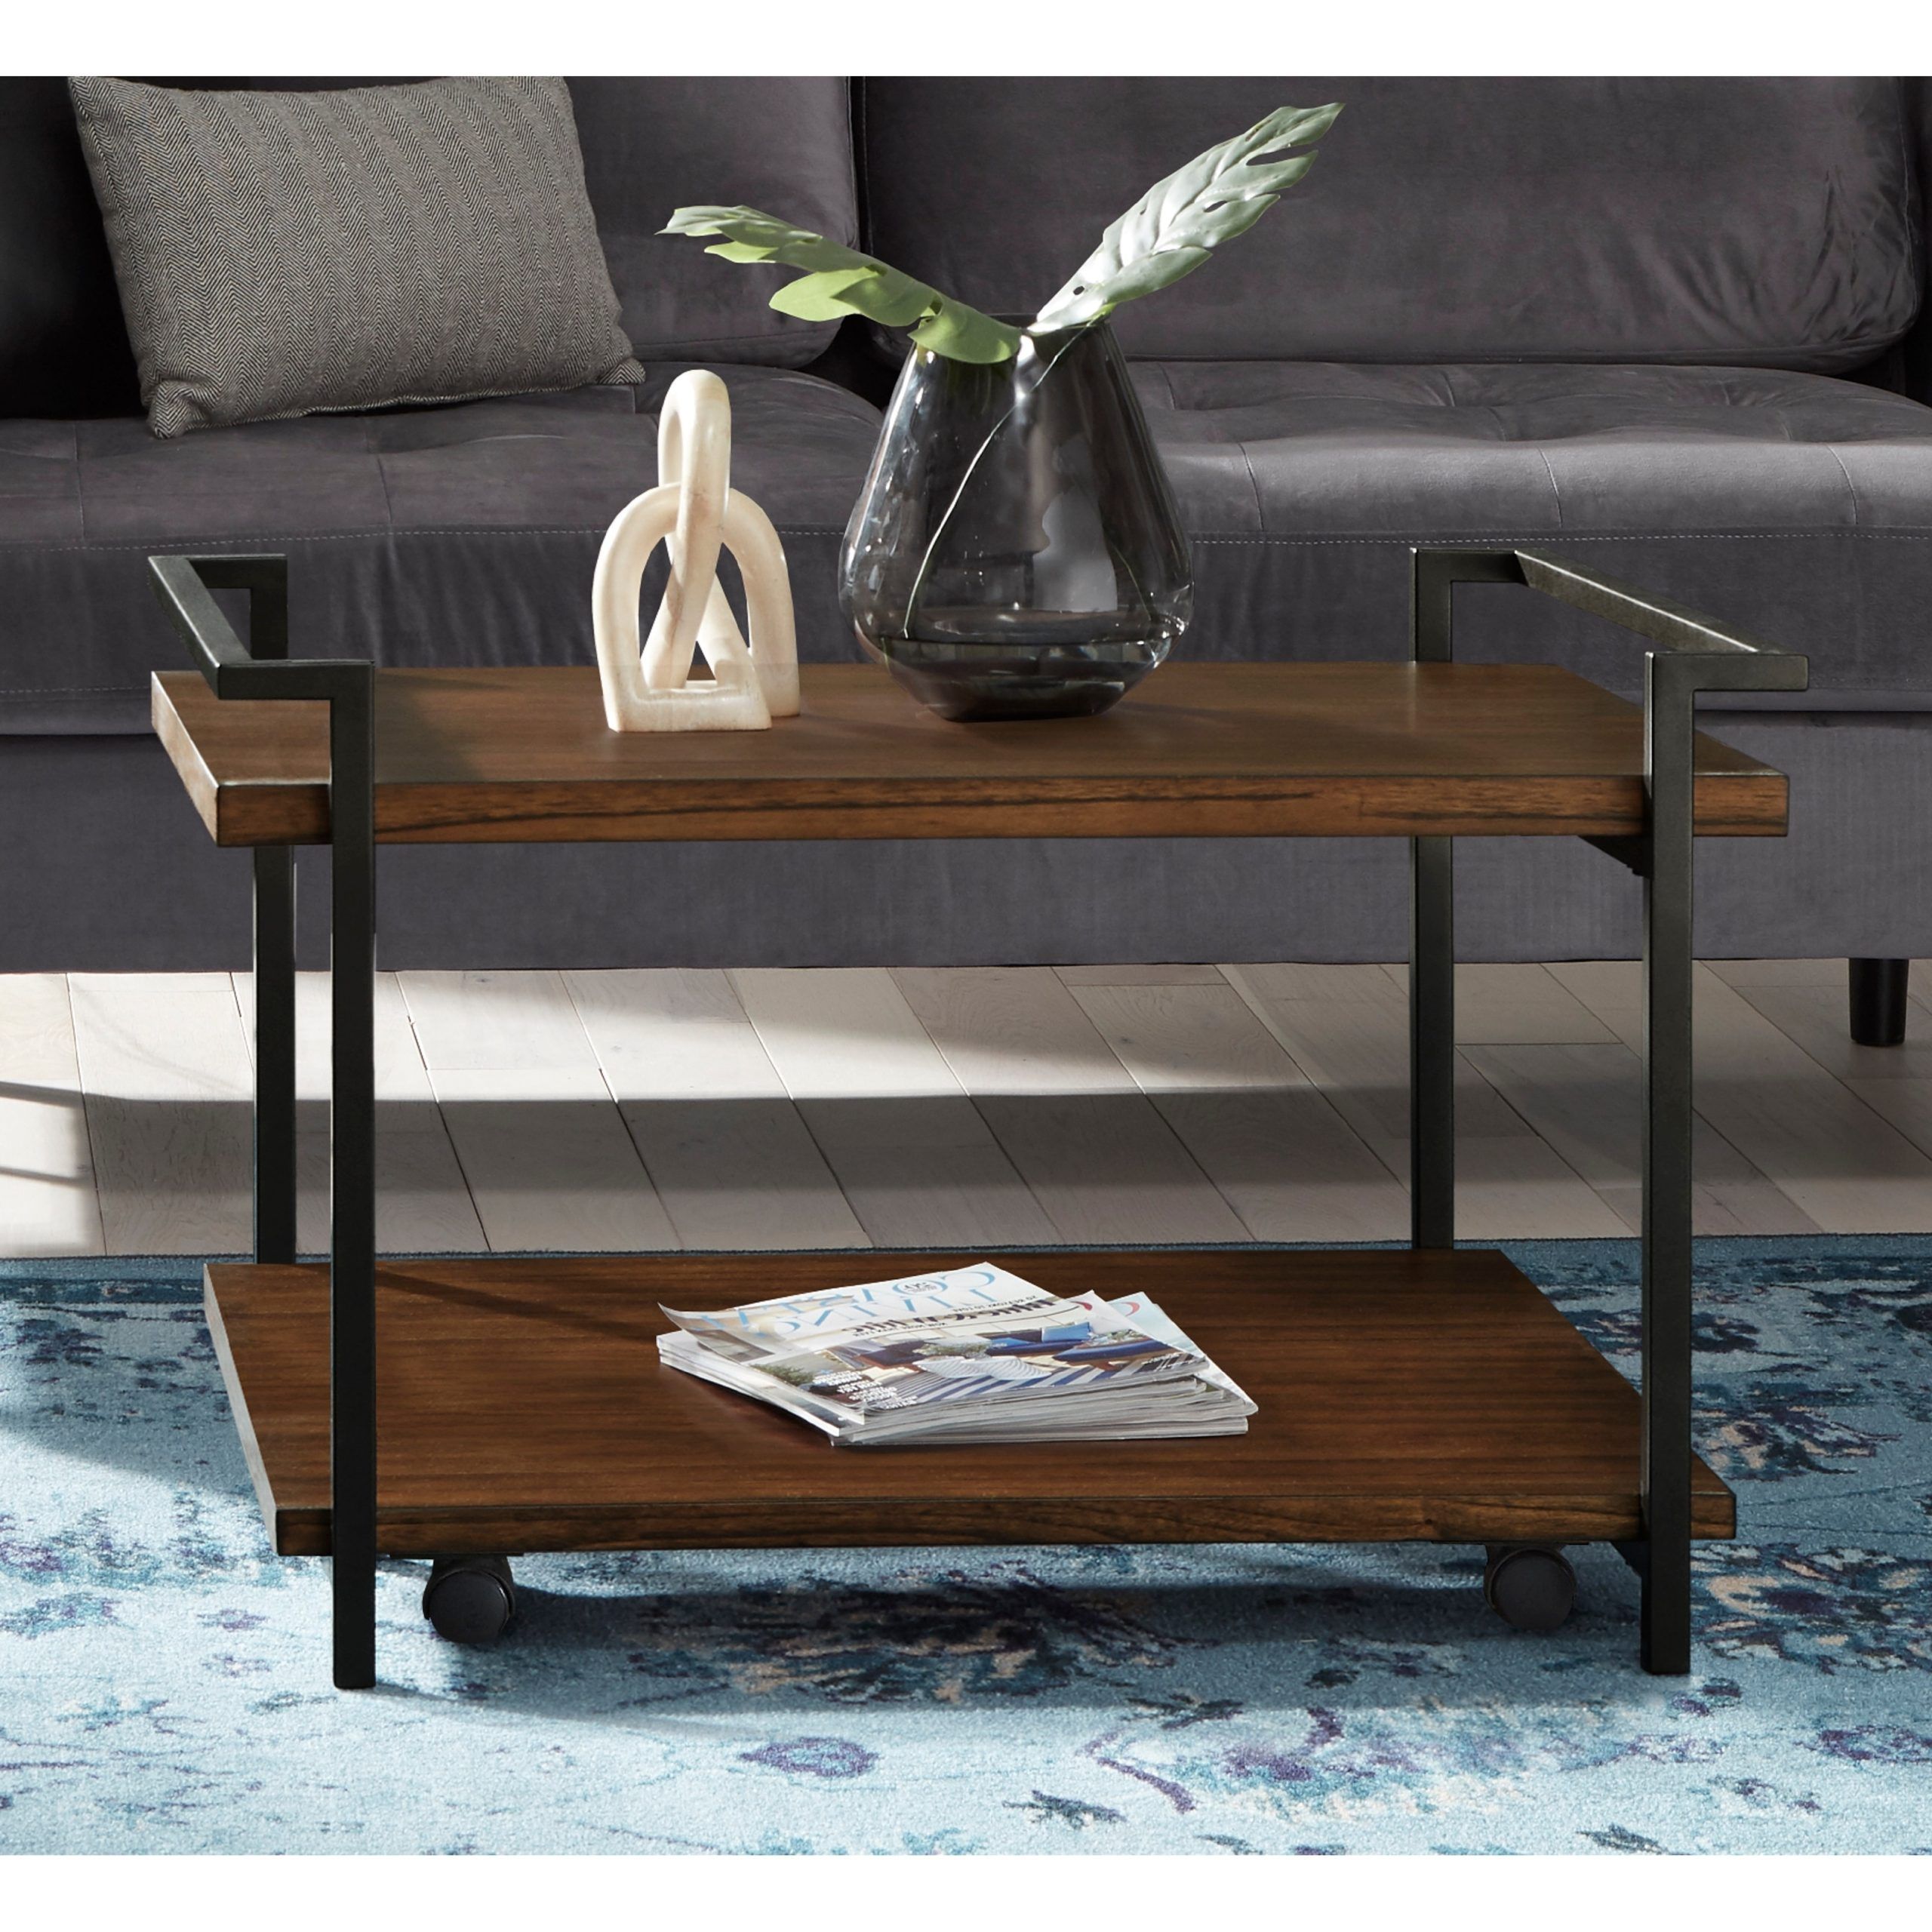 2019 Coffee Tables With Casters With Natural Solid Wood And Metal Coffee Table With Shelves – Bed Bath & Beyond  –  (View 7 of 10)